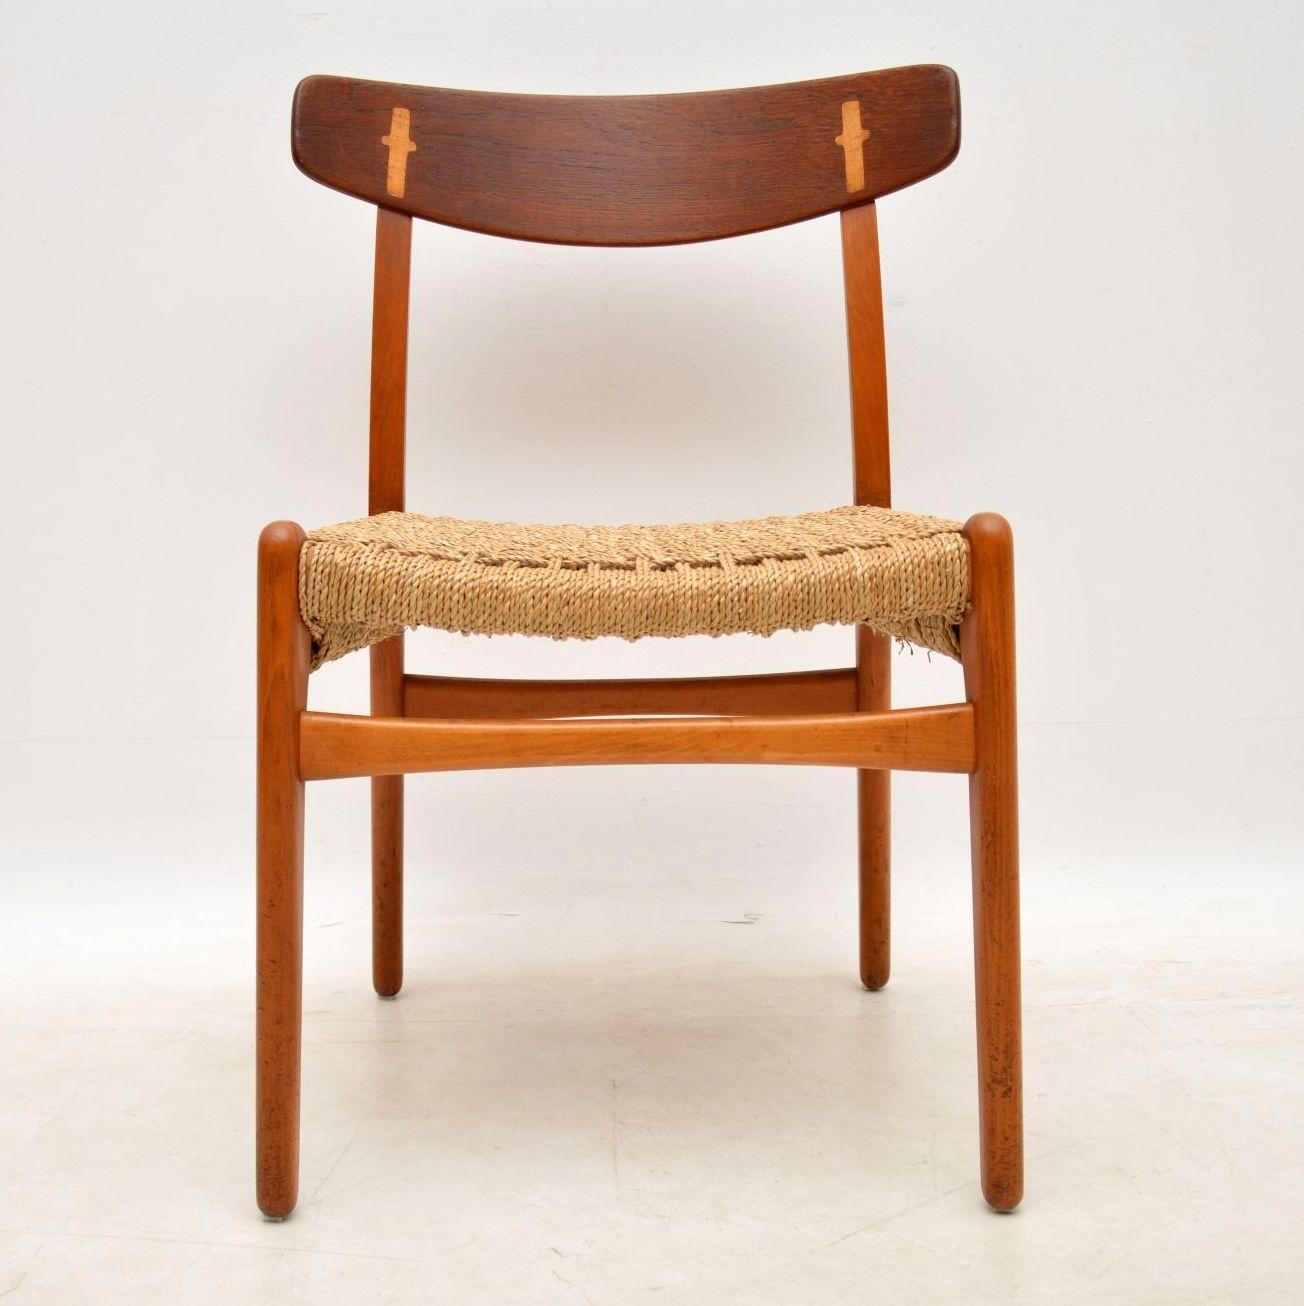 A beautiful and iconic CH-23 model chair designed by Hans Wegner, this was made in Denmark by Carl Hansen & Sons, it dates from the 1950s-1960s. It’s in lovely vintage condition, with some minor surface wear here and there. This has a teak and beech